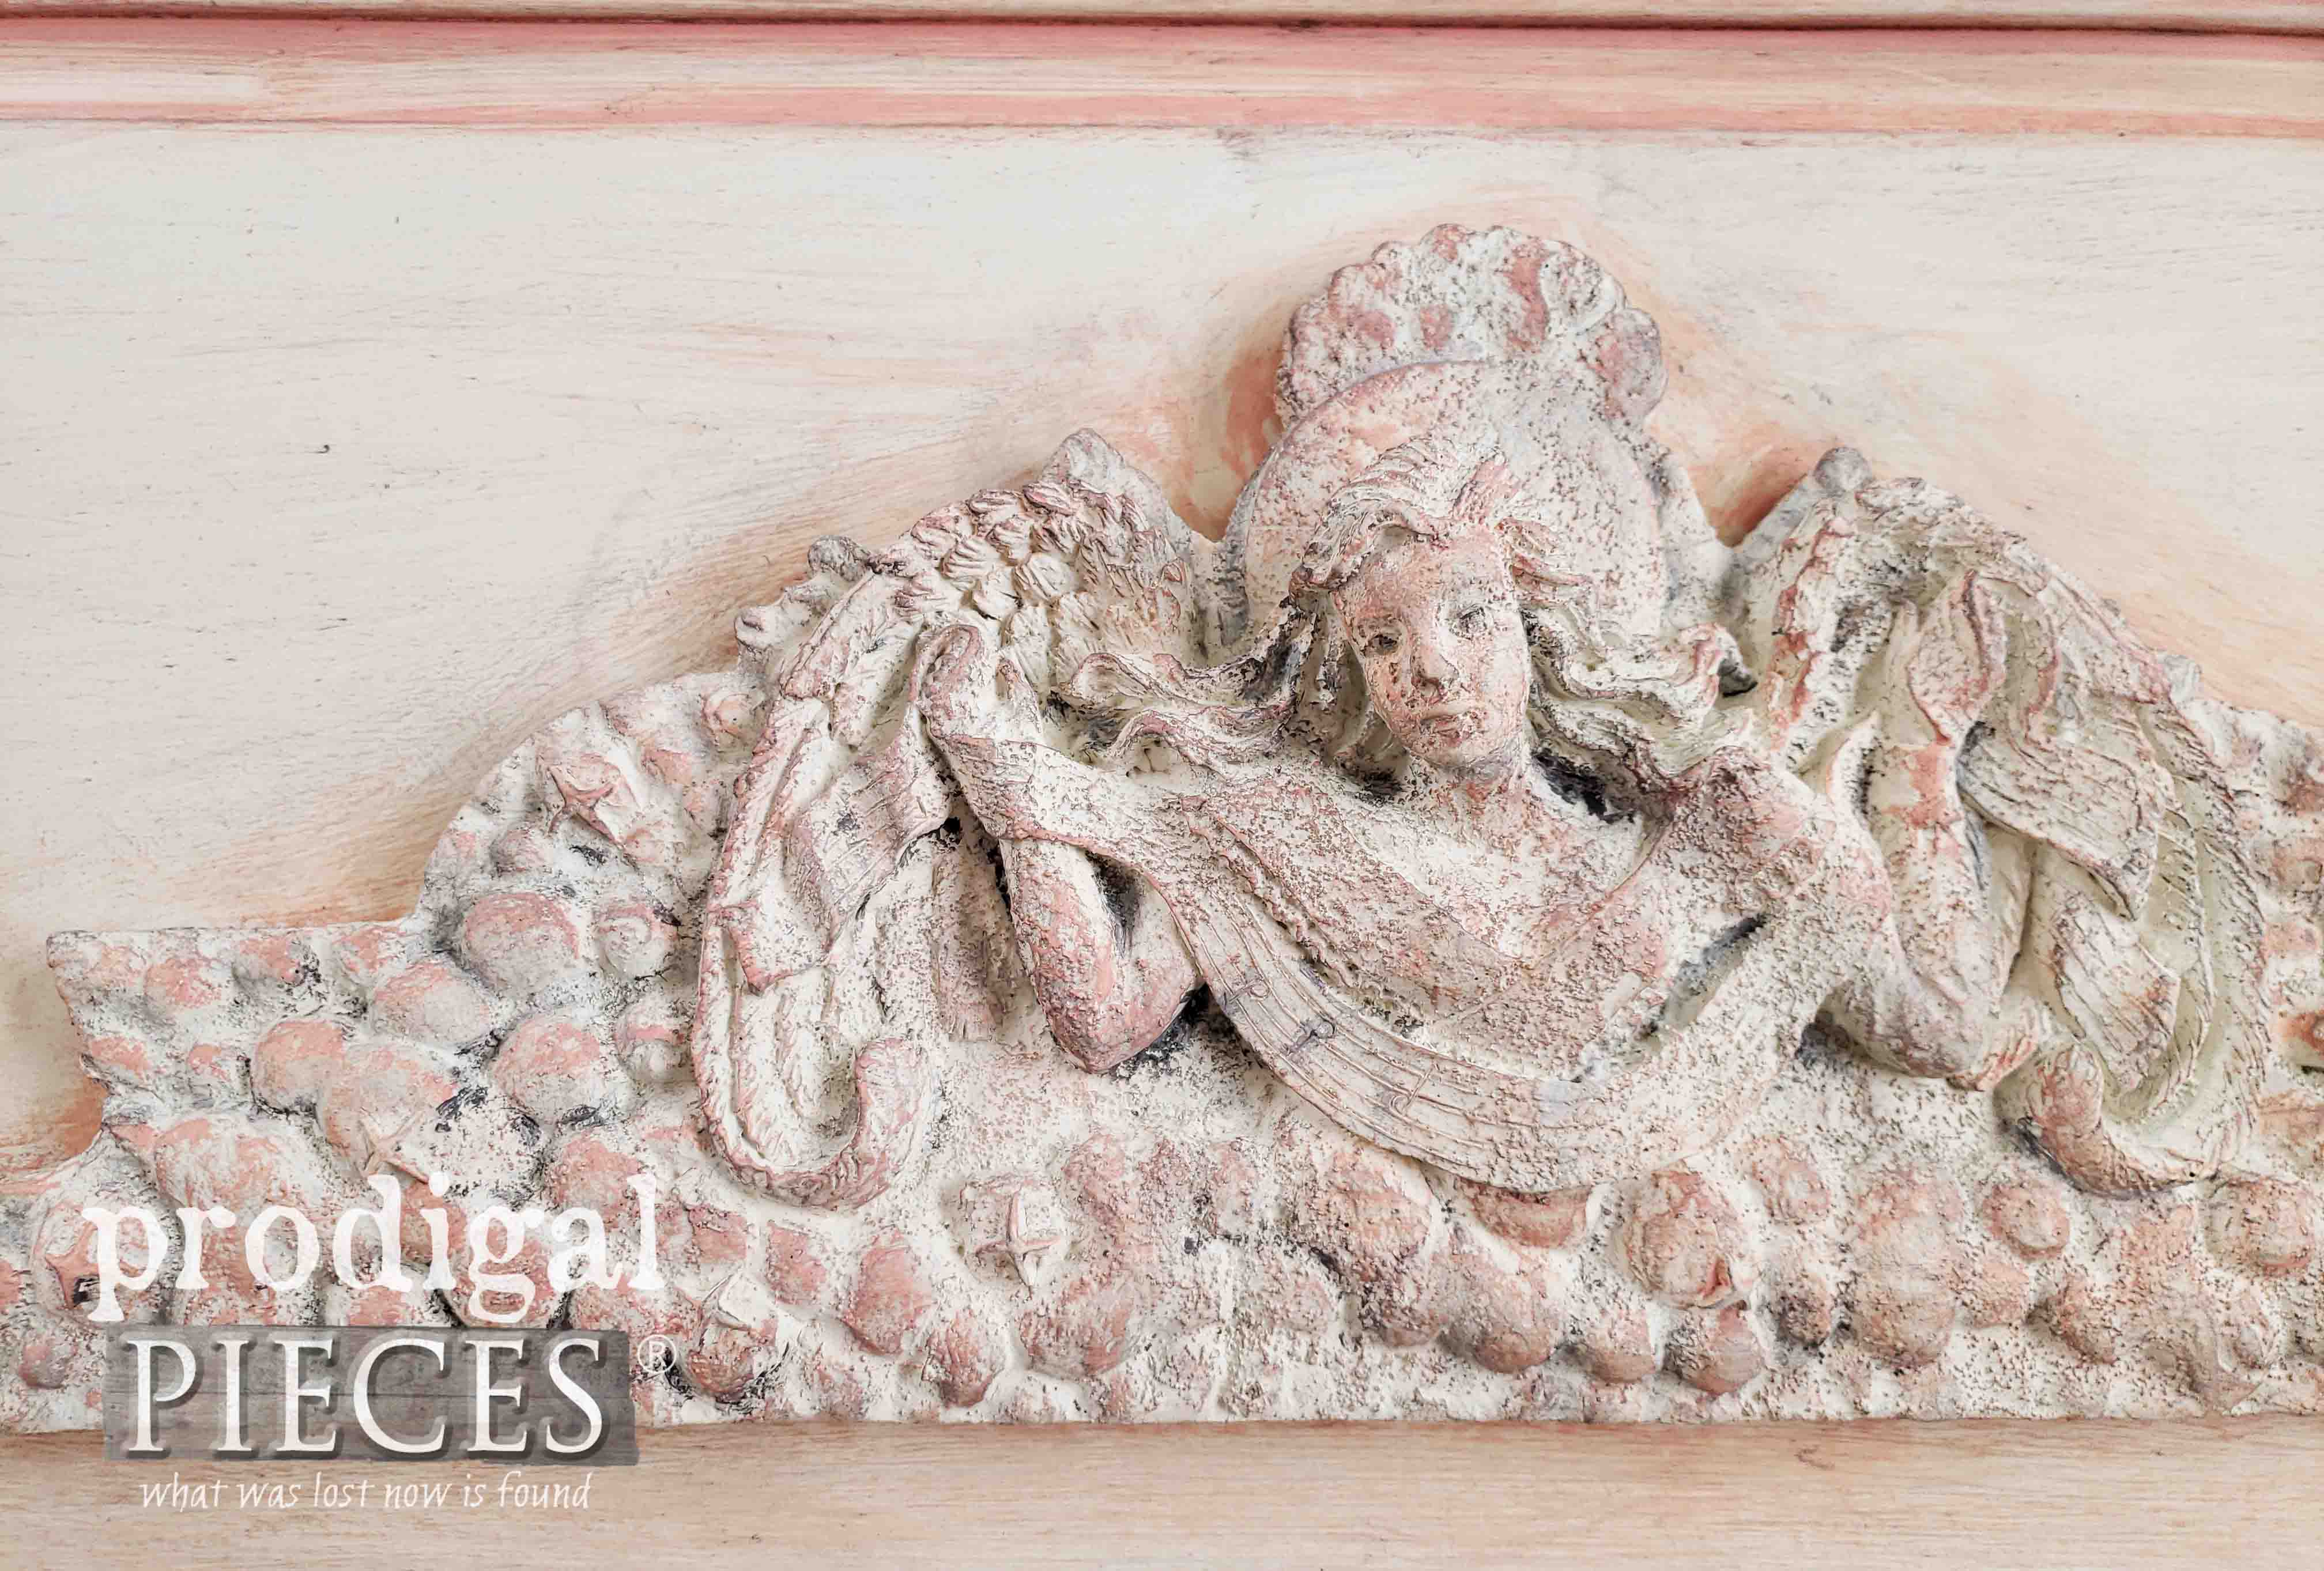 DIY French Relief Wall Art in Coral Pink by Prodigal Pieces | prodigalpieces.com